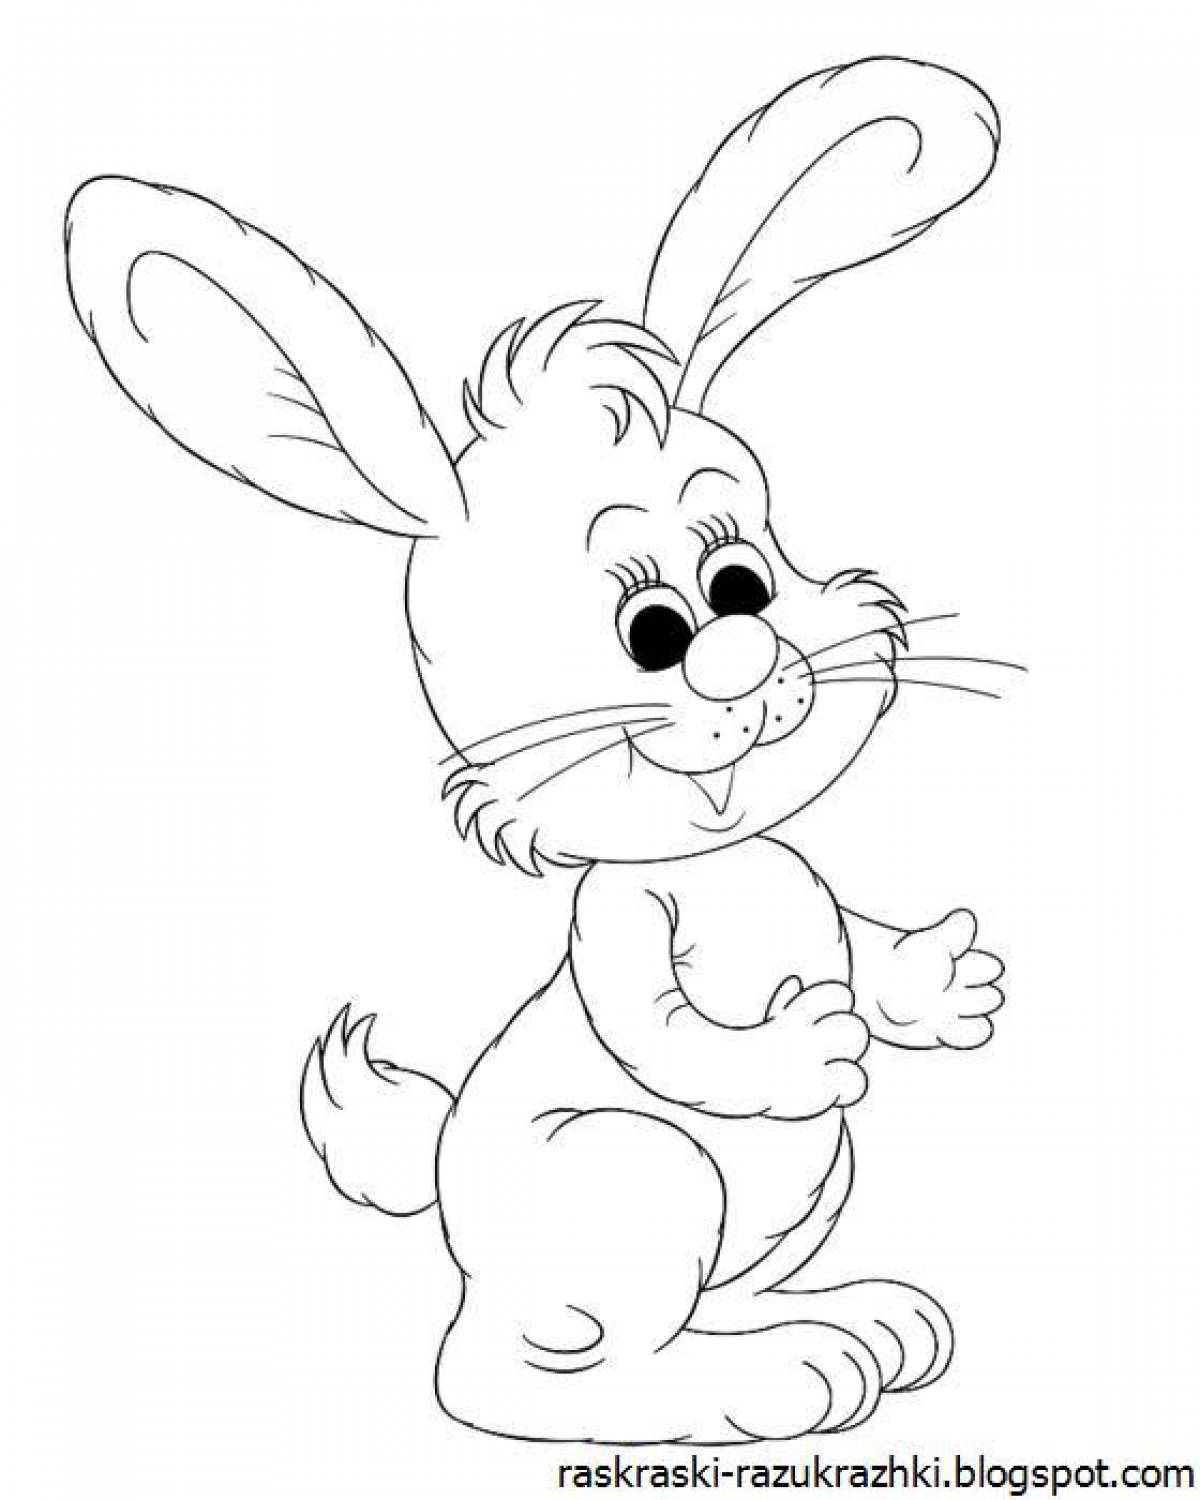 Magic Bunny coloring book for 3-4 year olds